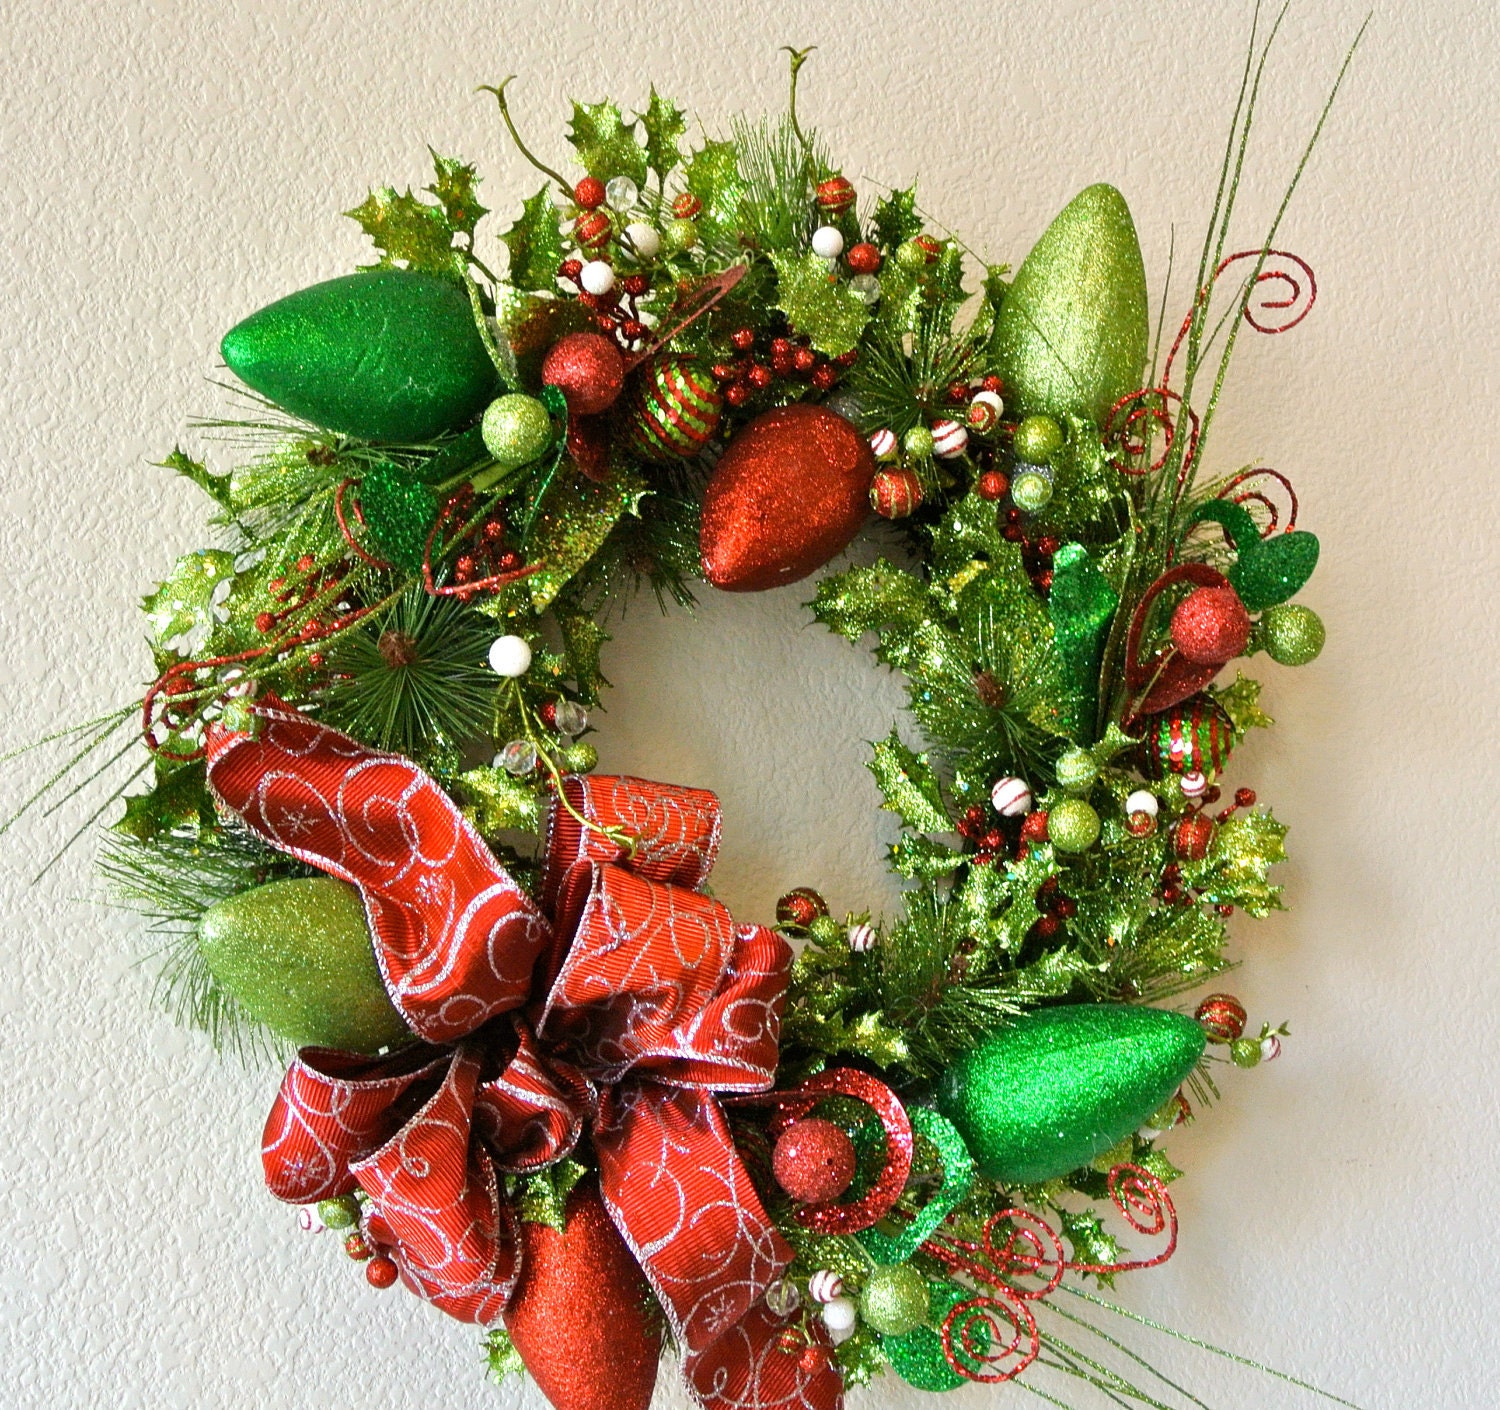 Glittery Christmas Wreath With Red and Silver Bow - 4allseasons